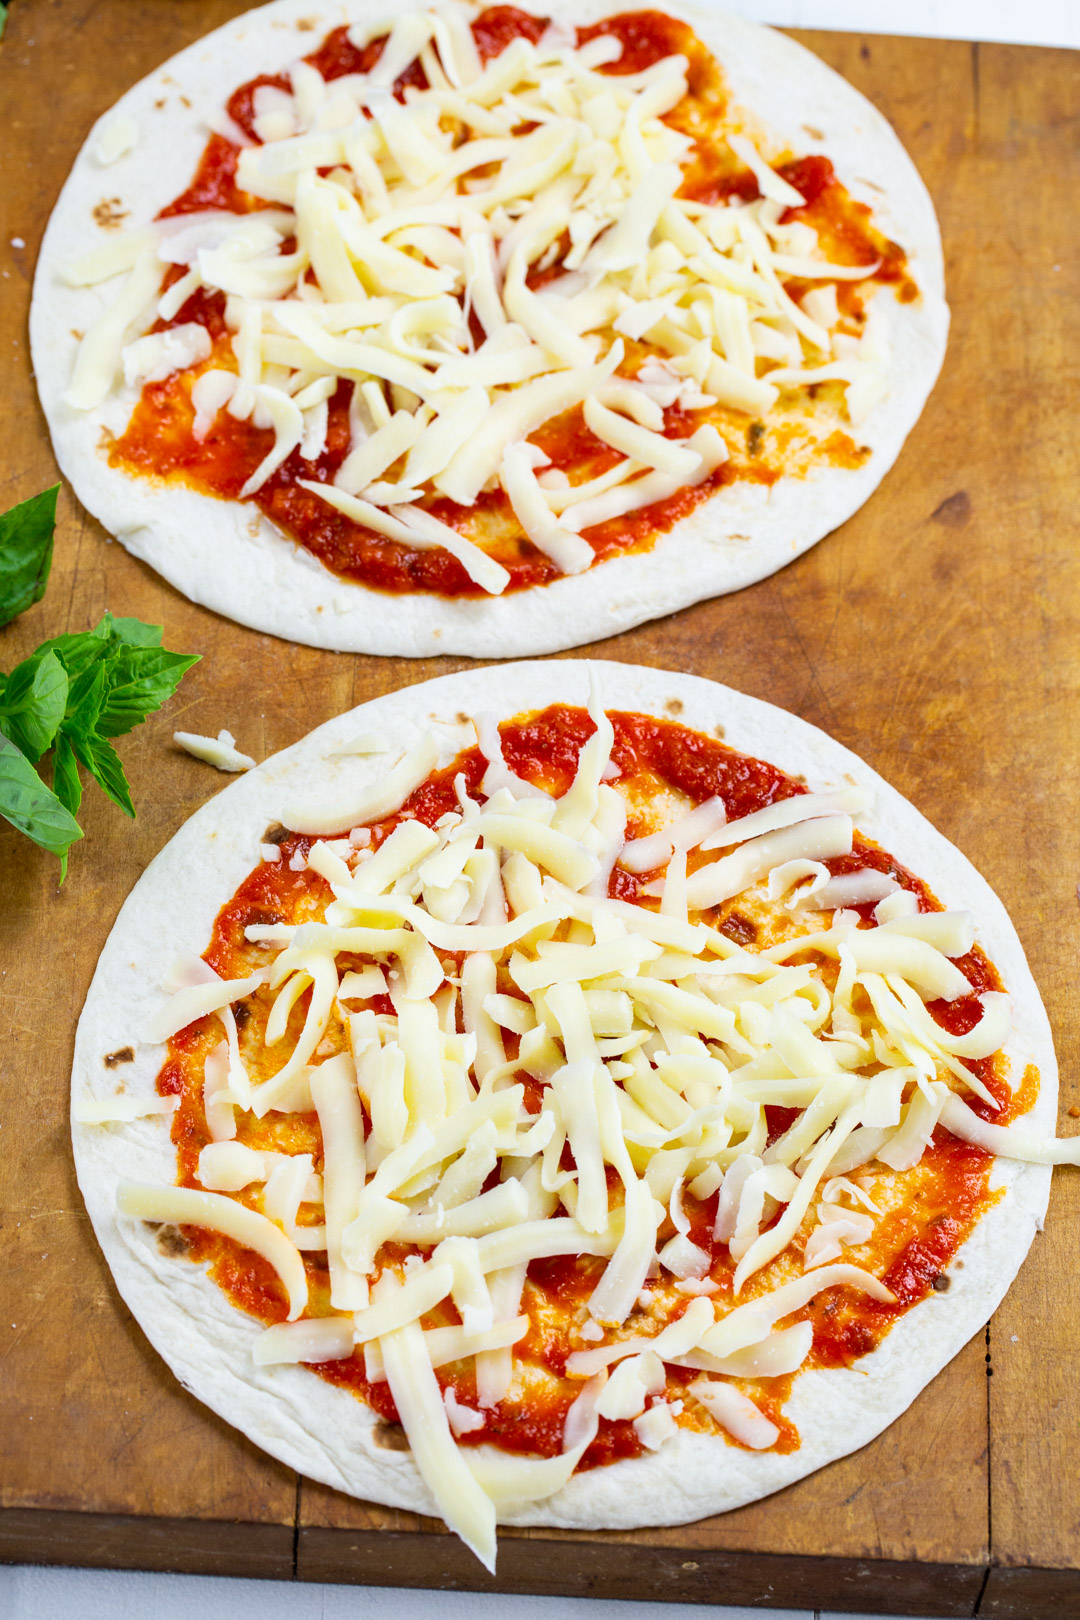 Cheese sprinkled over pizza sauce.